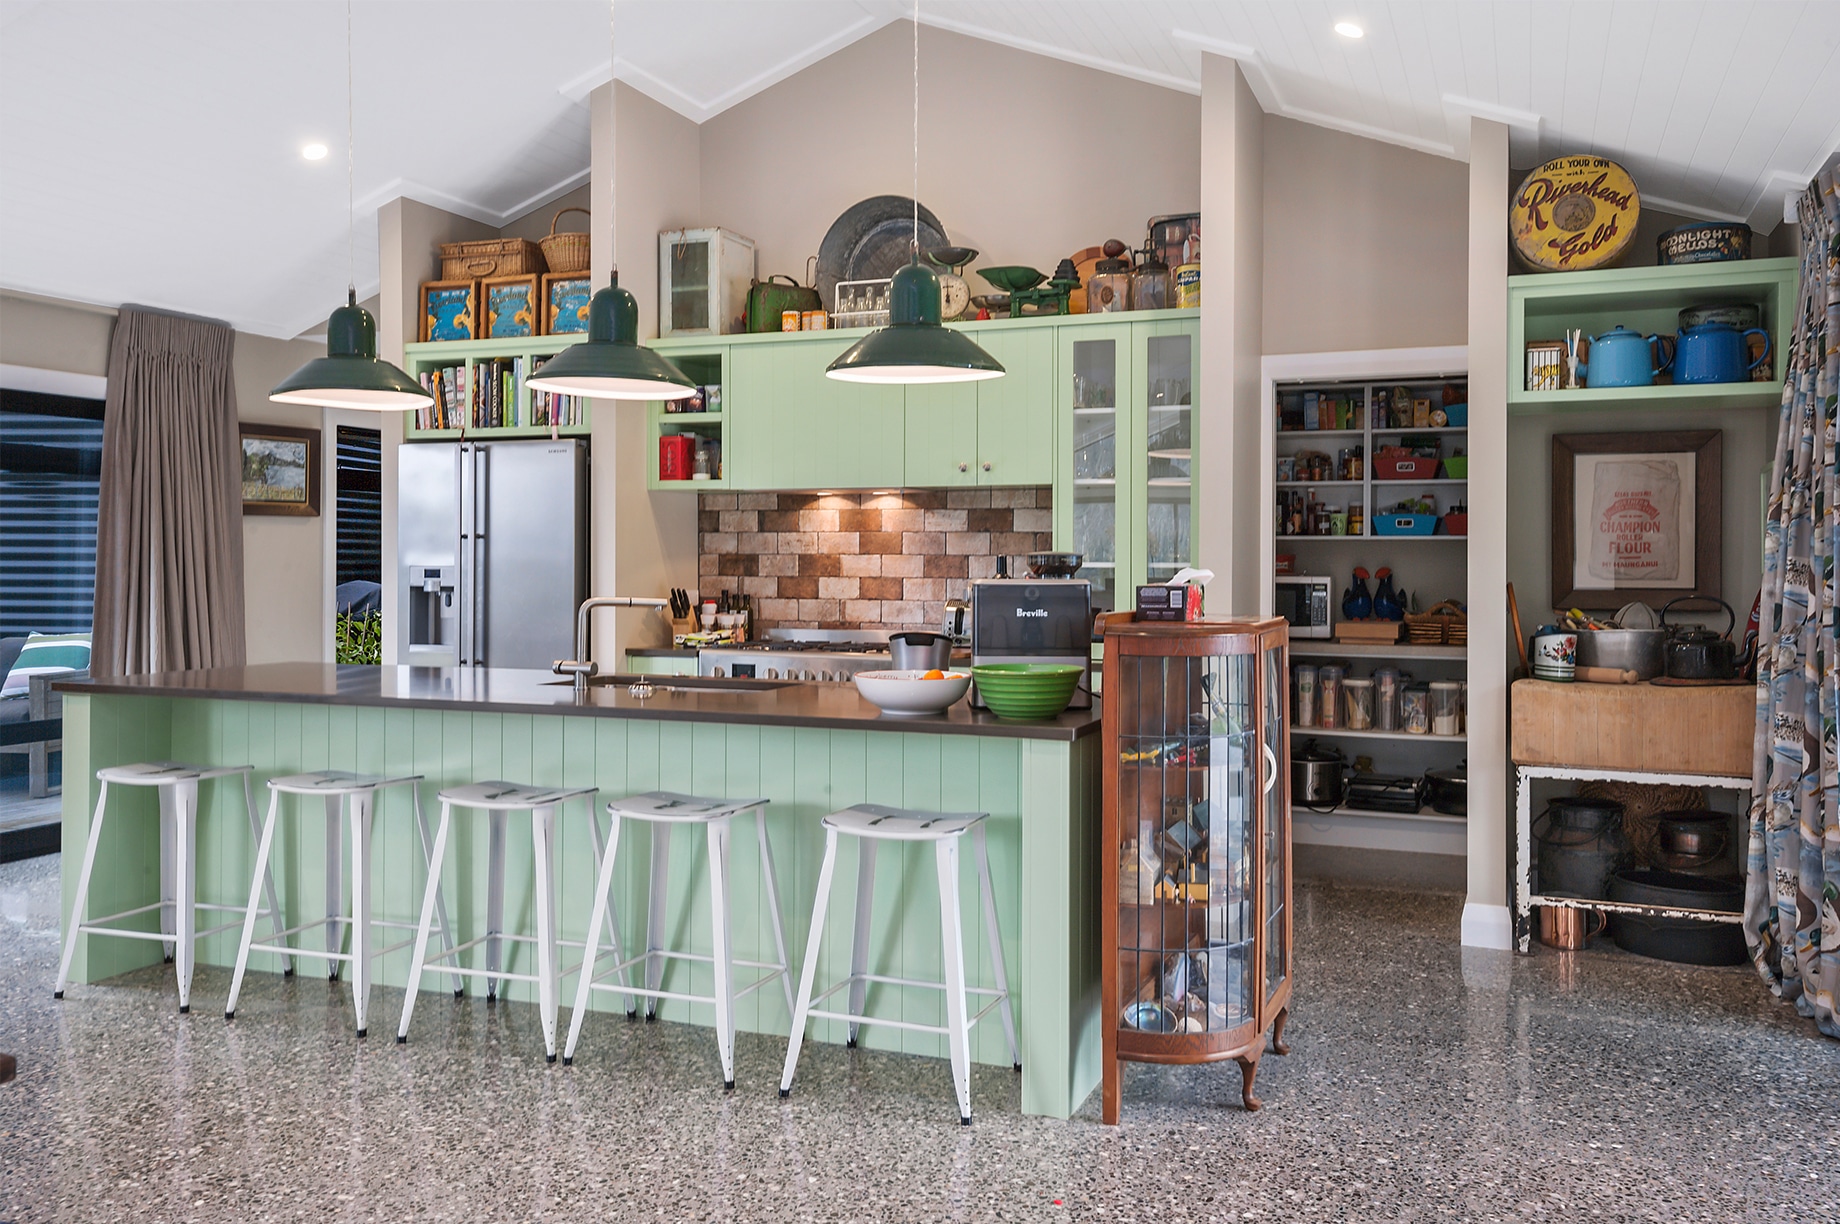 Mint coloured kitchen interior with hanging lights